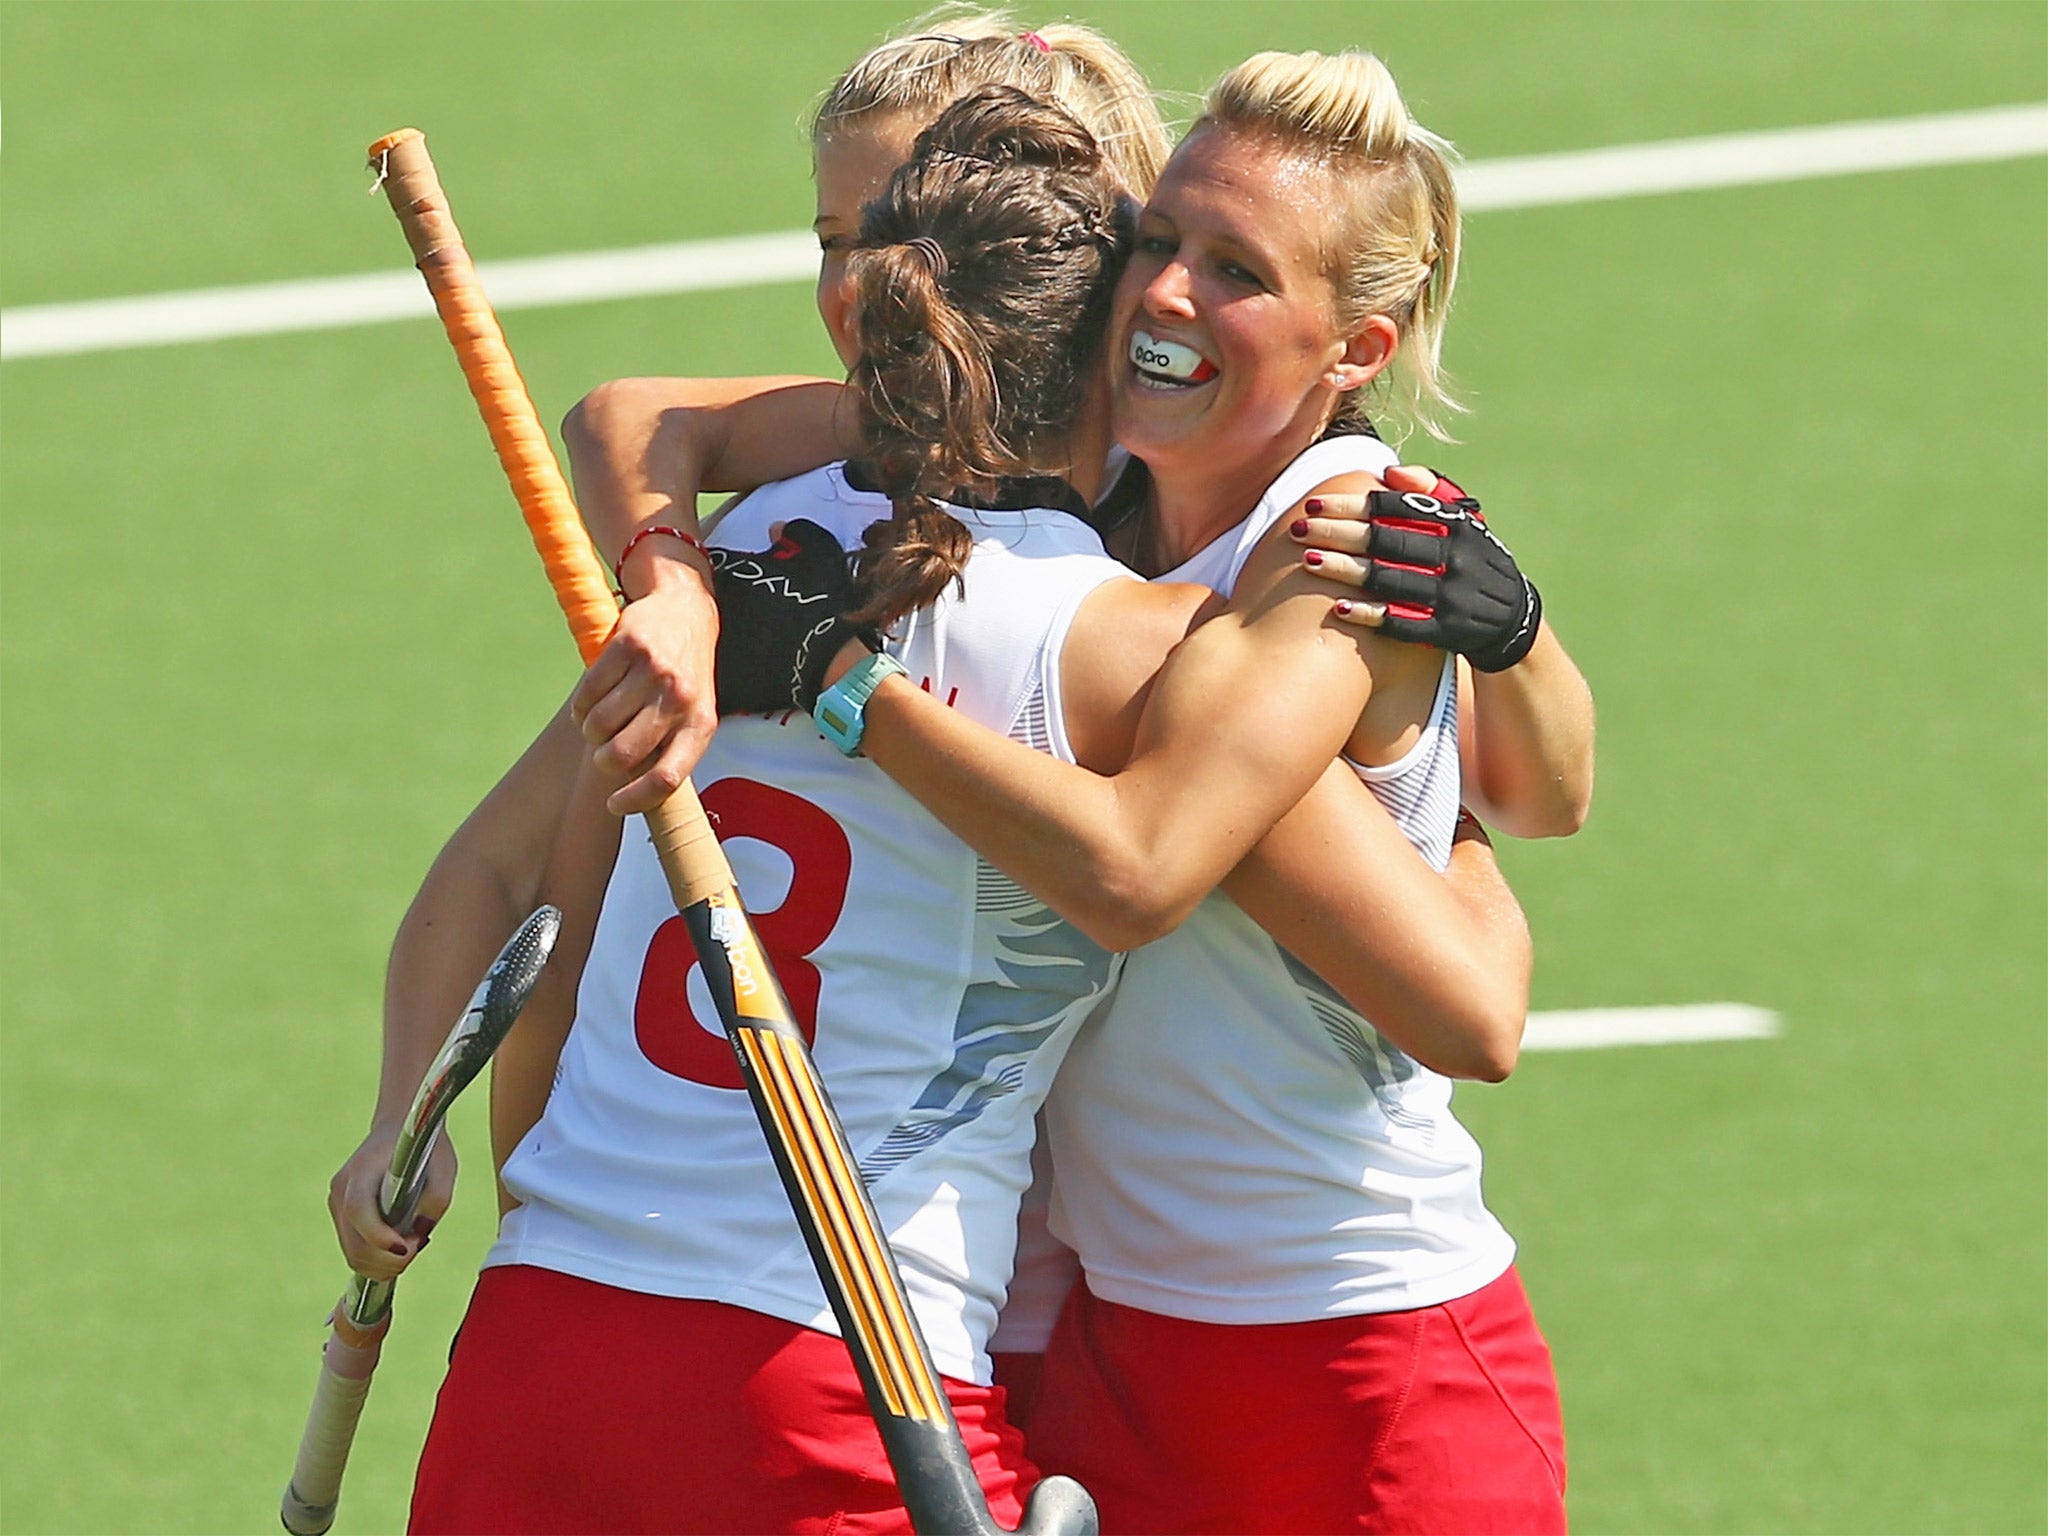 England’s Alex Danson (right) opened the scoring in their victory over Scotland